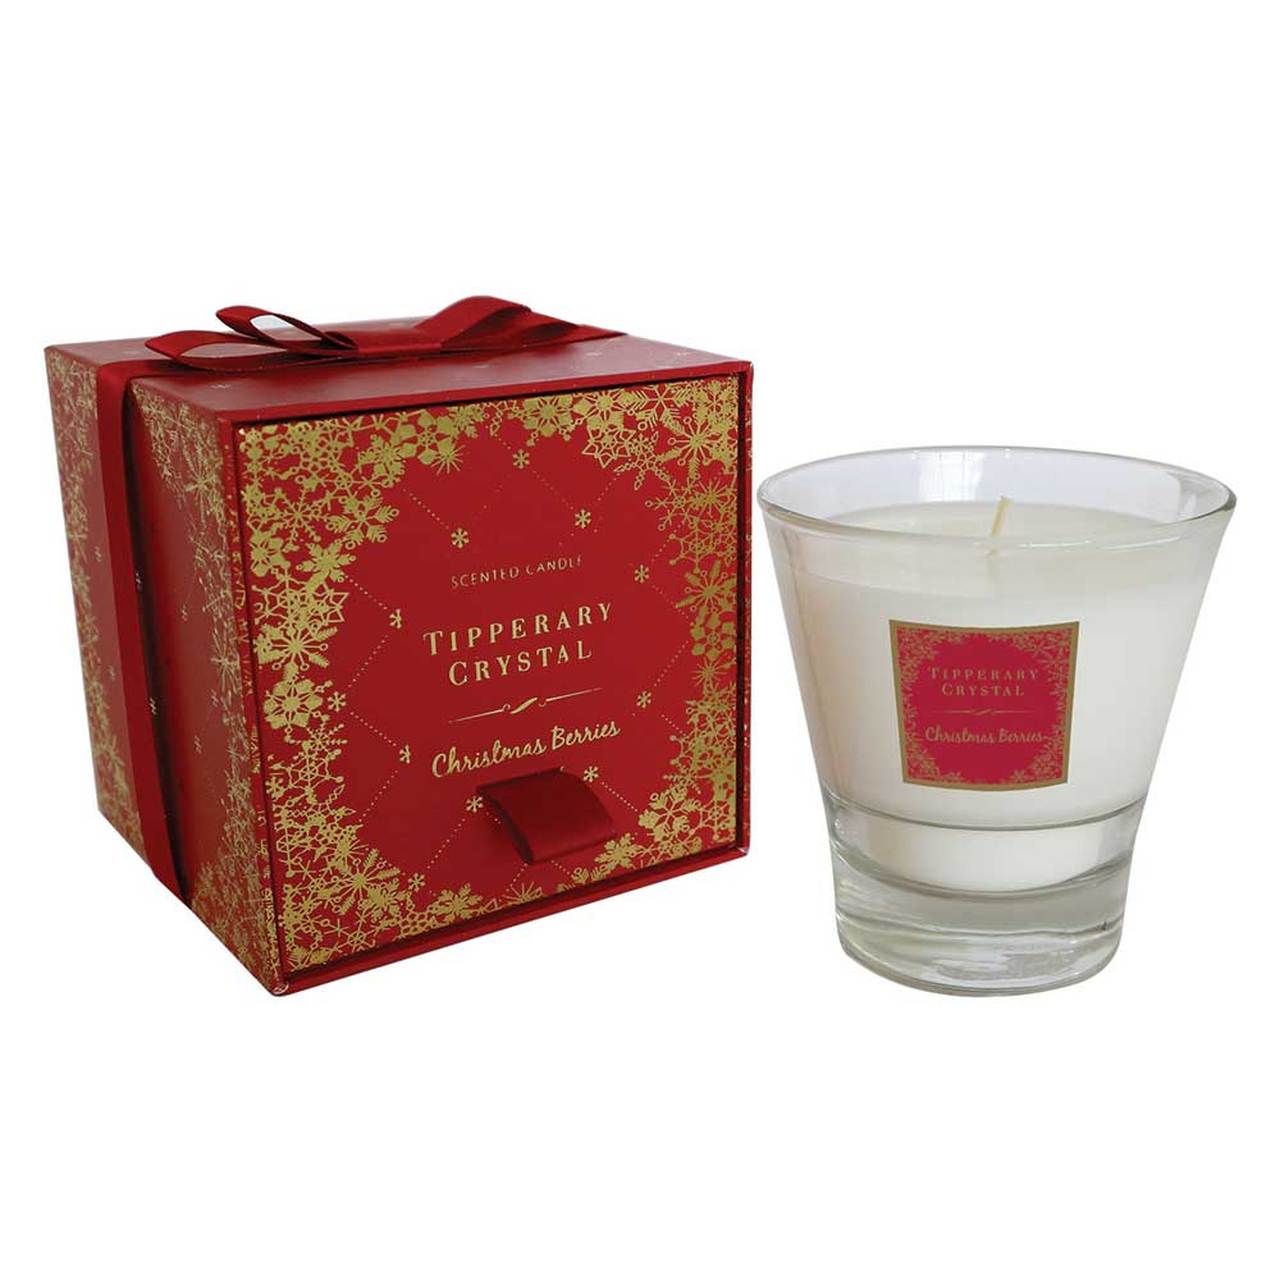 Tipperary Crystal Christmas Berries Filled Tumbler  The Christmas Berries Tumbler Candle is a welcome addition to any home as a simple way of adding some festive spirit. Featuring scents of bouquets of fresh roses, sweetened with blackcurrant leaves, this gorgeous Christmas scent is perfect for the festive season.